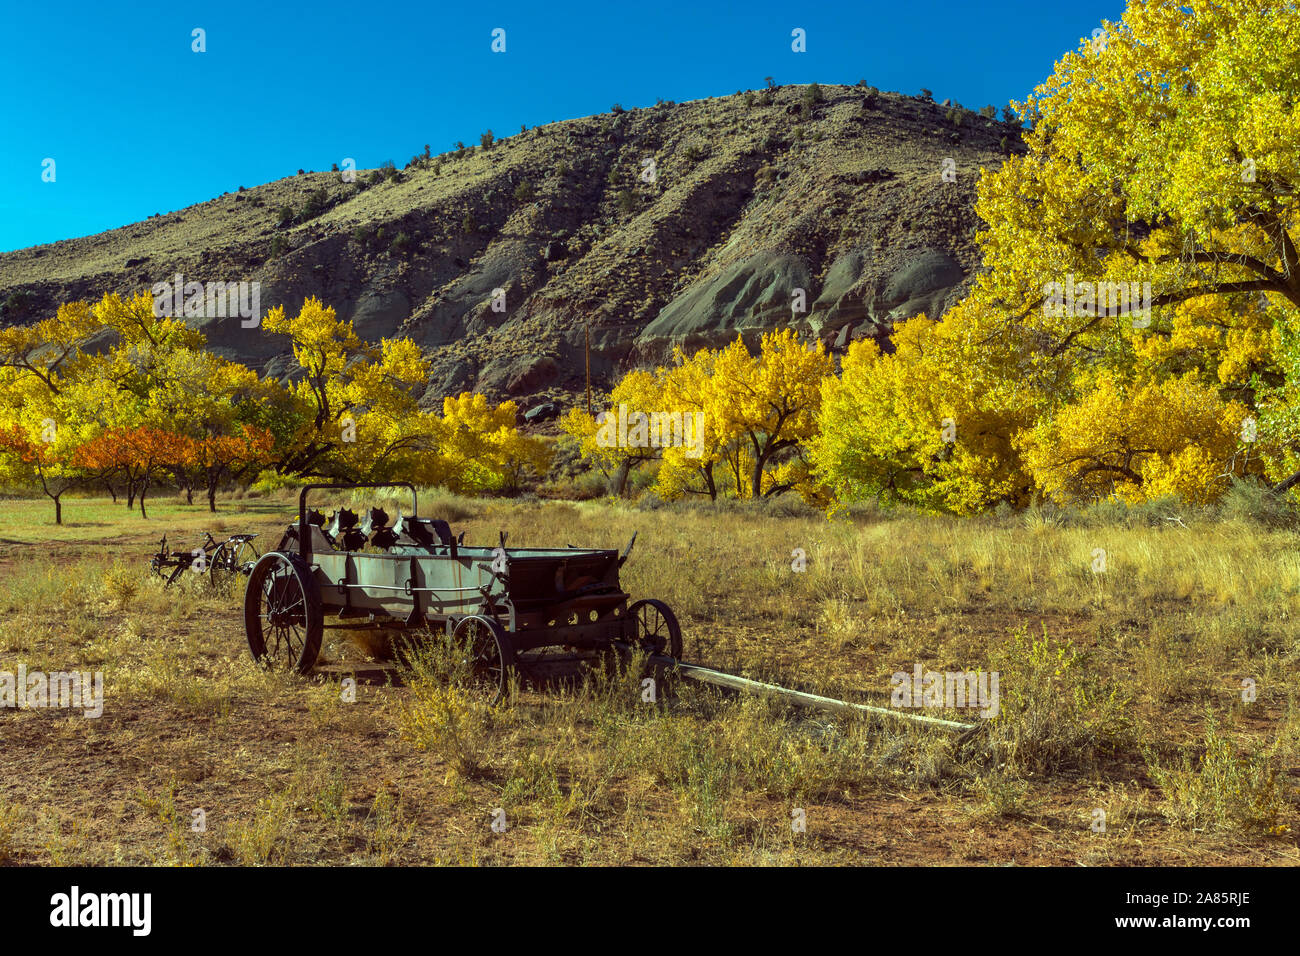 Old Rustic Wooden Farming Wagon in the Fruita District of Capital Reef National Park Stock Photo